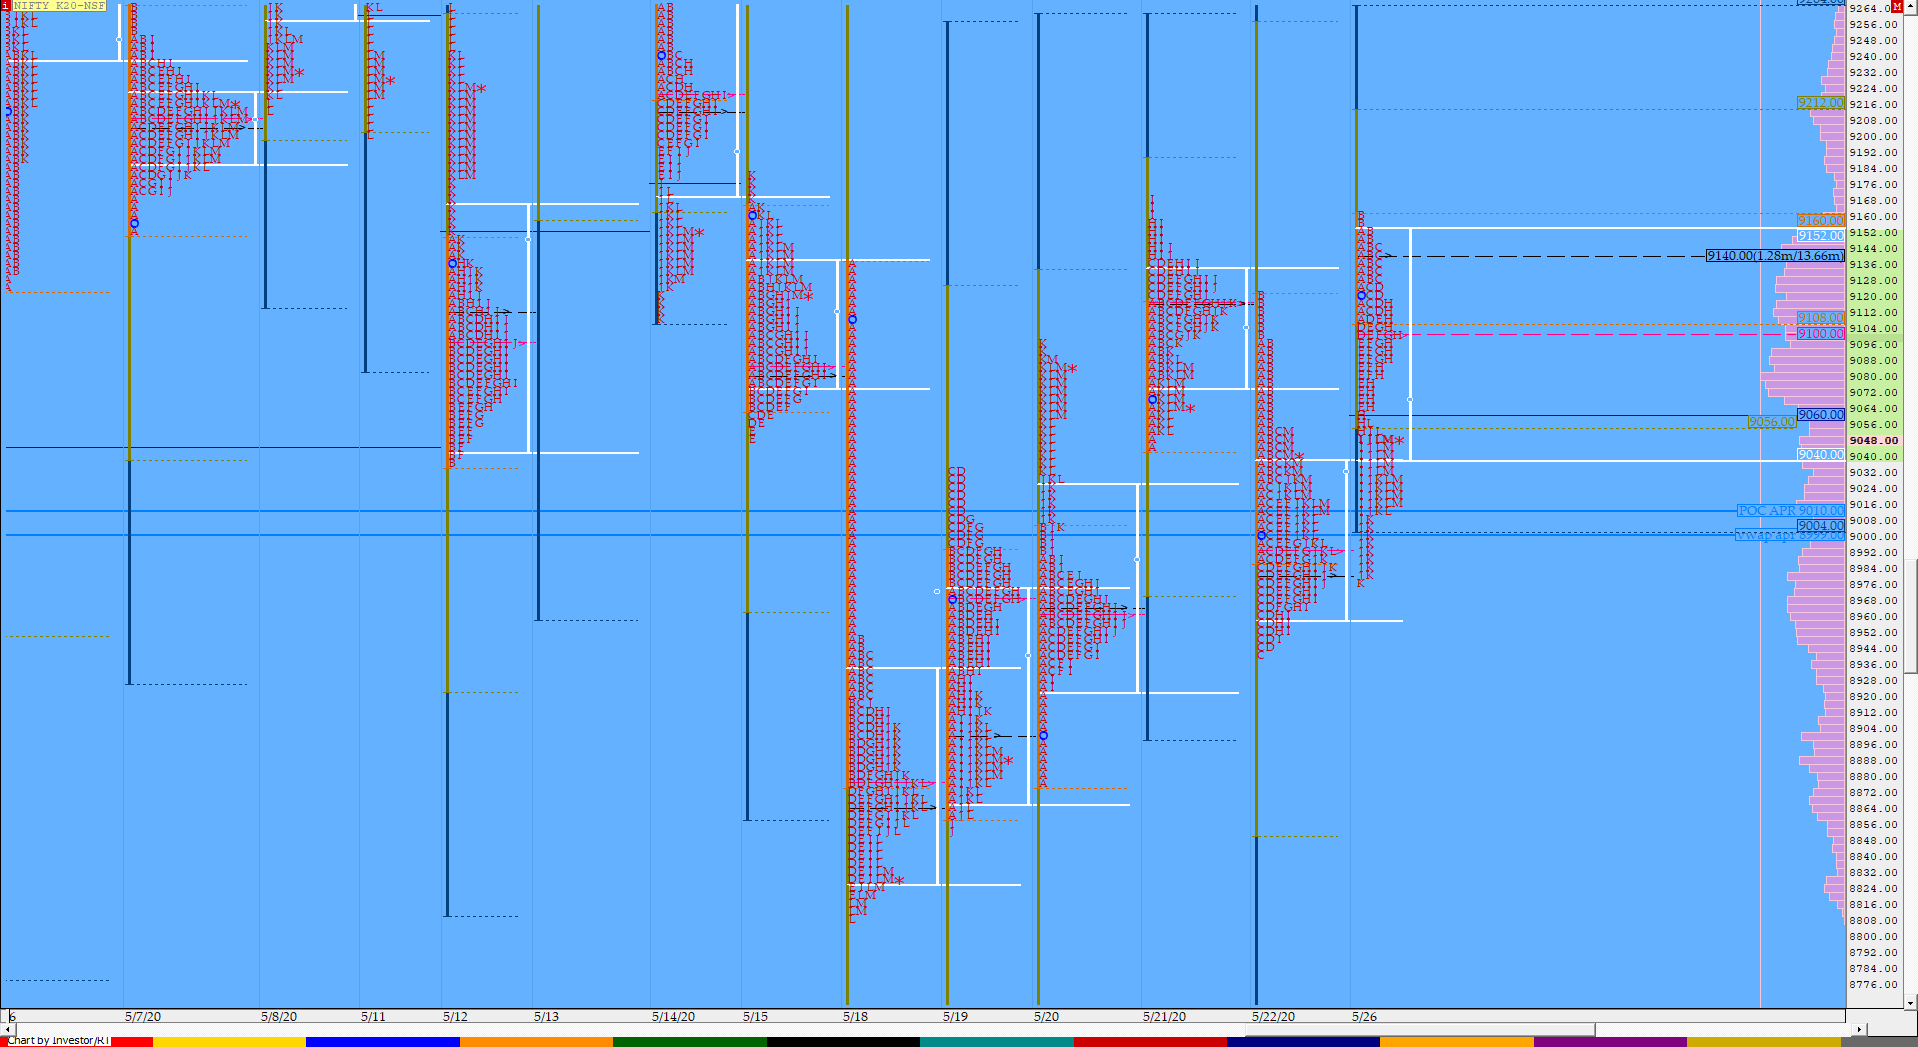 Nf Compo1 16 Market Profile Analysis Dated 26Th May 2020 Banknifty Futures, Charts, Day Trading, Intraday Trading, Intraday Trading Strategies, Market Profile, Market Profile Trading Strategies, Nifty Futures, Order Flow Analysis, Support And Resistance, Technical Analysis, Trading Strategies, Volume Profile Trading